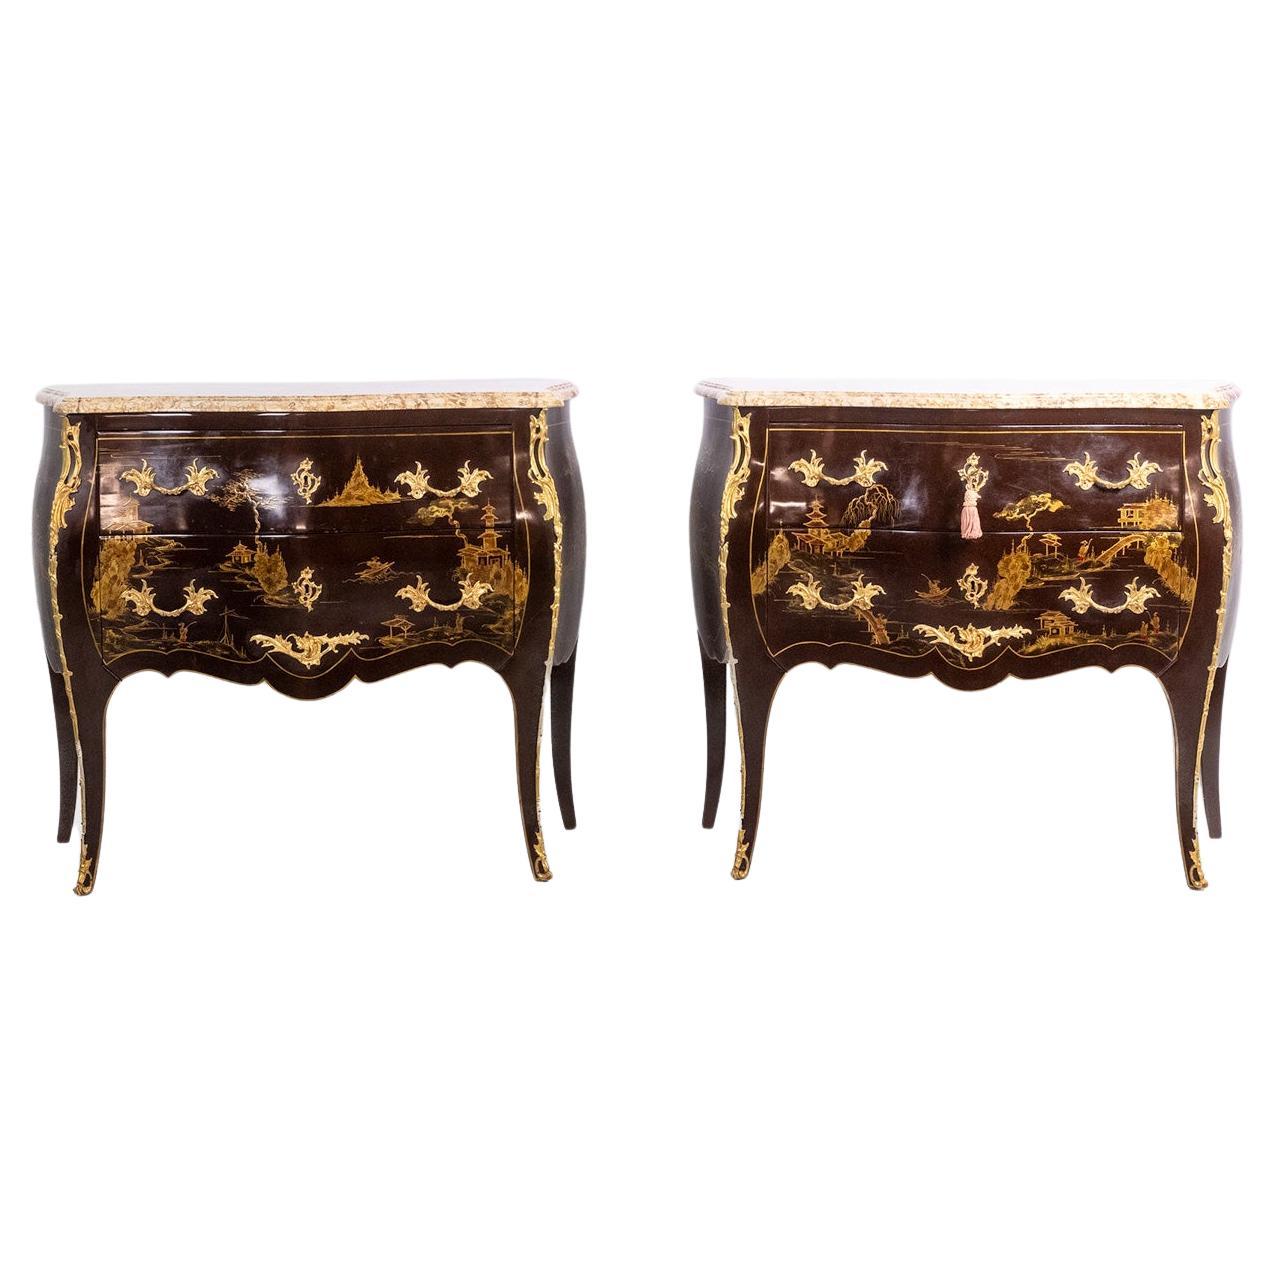 Pair of Louis XV style chests of drawers in lacquer and bronze. 1950s.